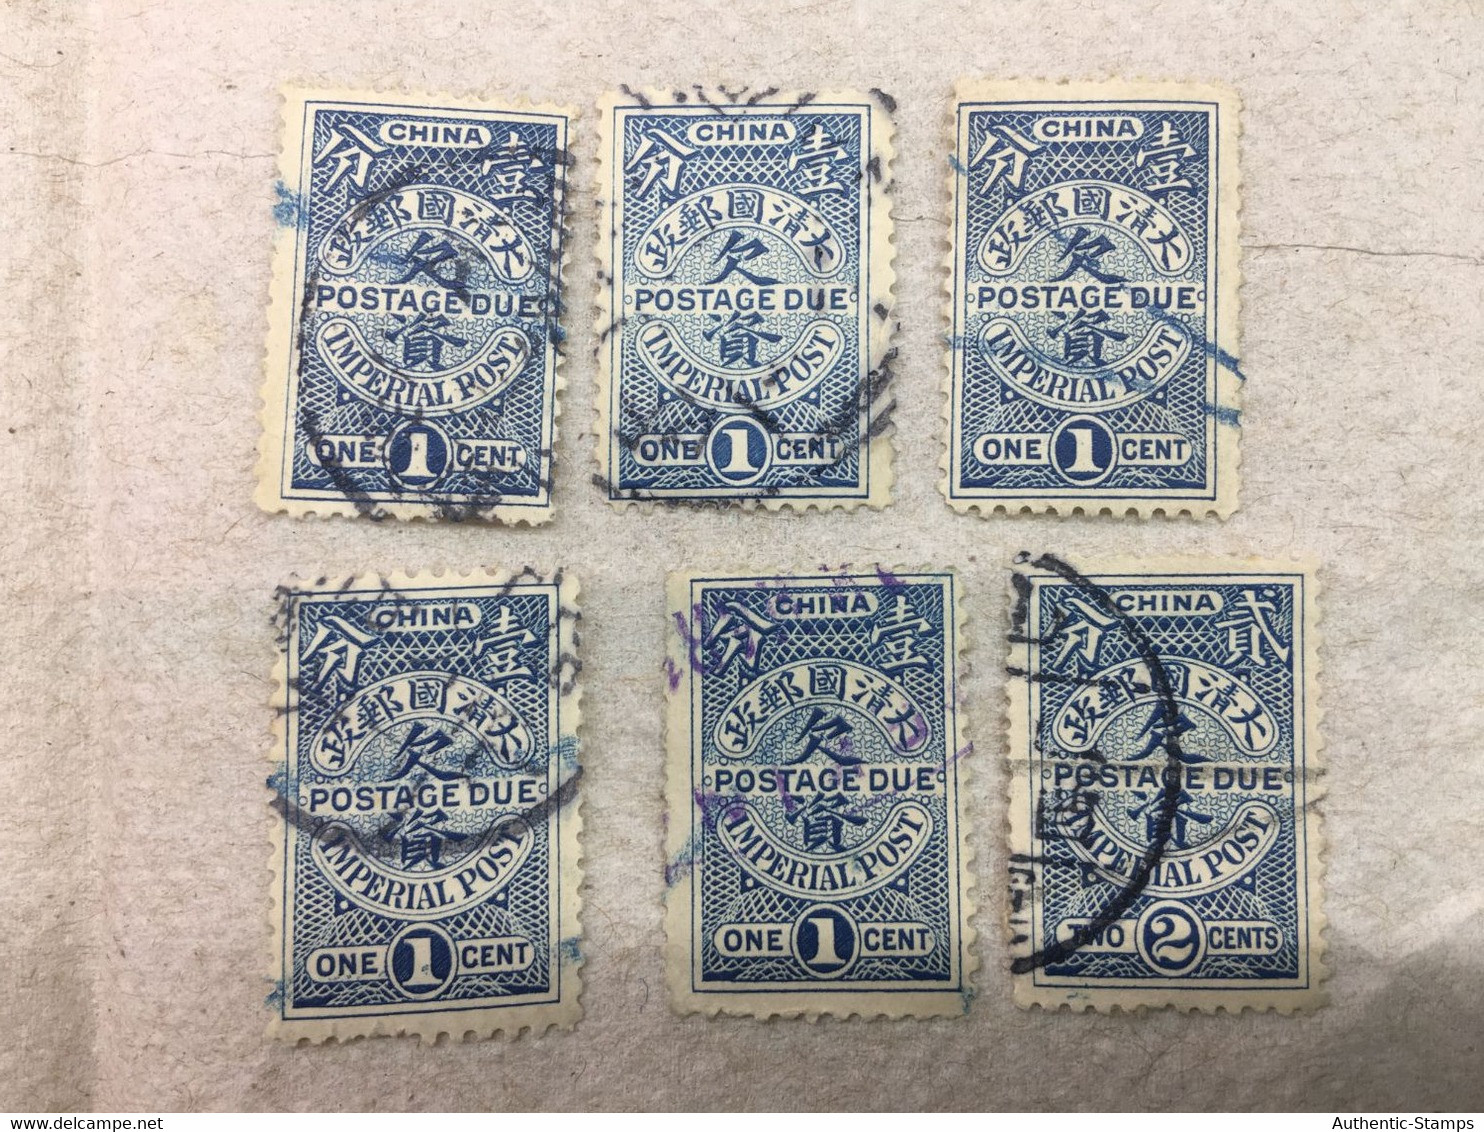 CHINA STAMP, Imperial, USED, TIMBRO, STEMPEL, CINA, CHINE, LIST 5193 - Used Stamps